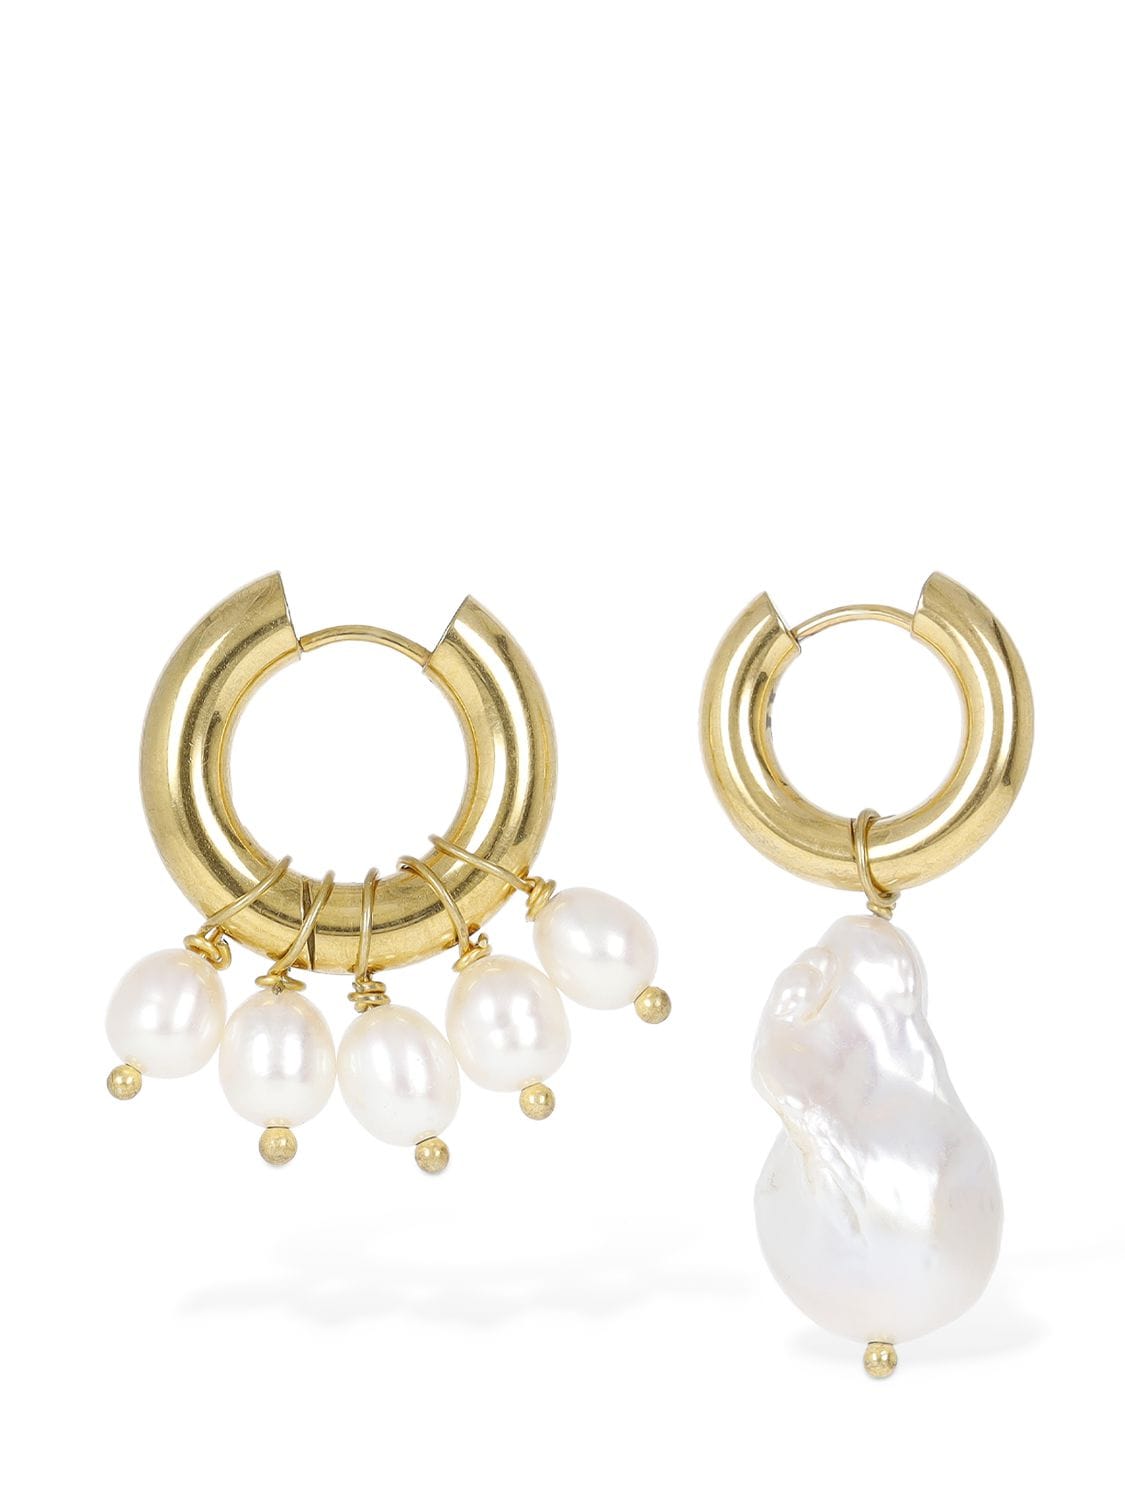 Image of Mismatched Pearl Earrings